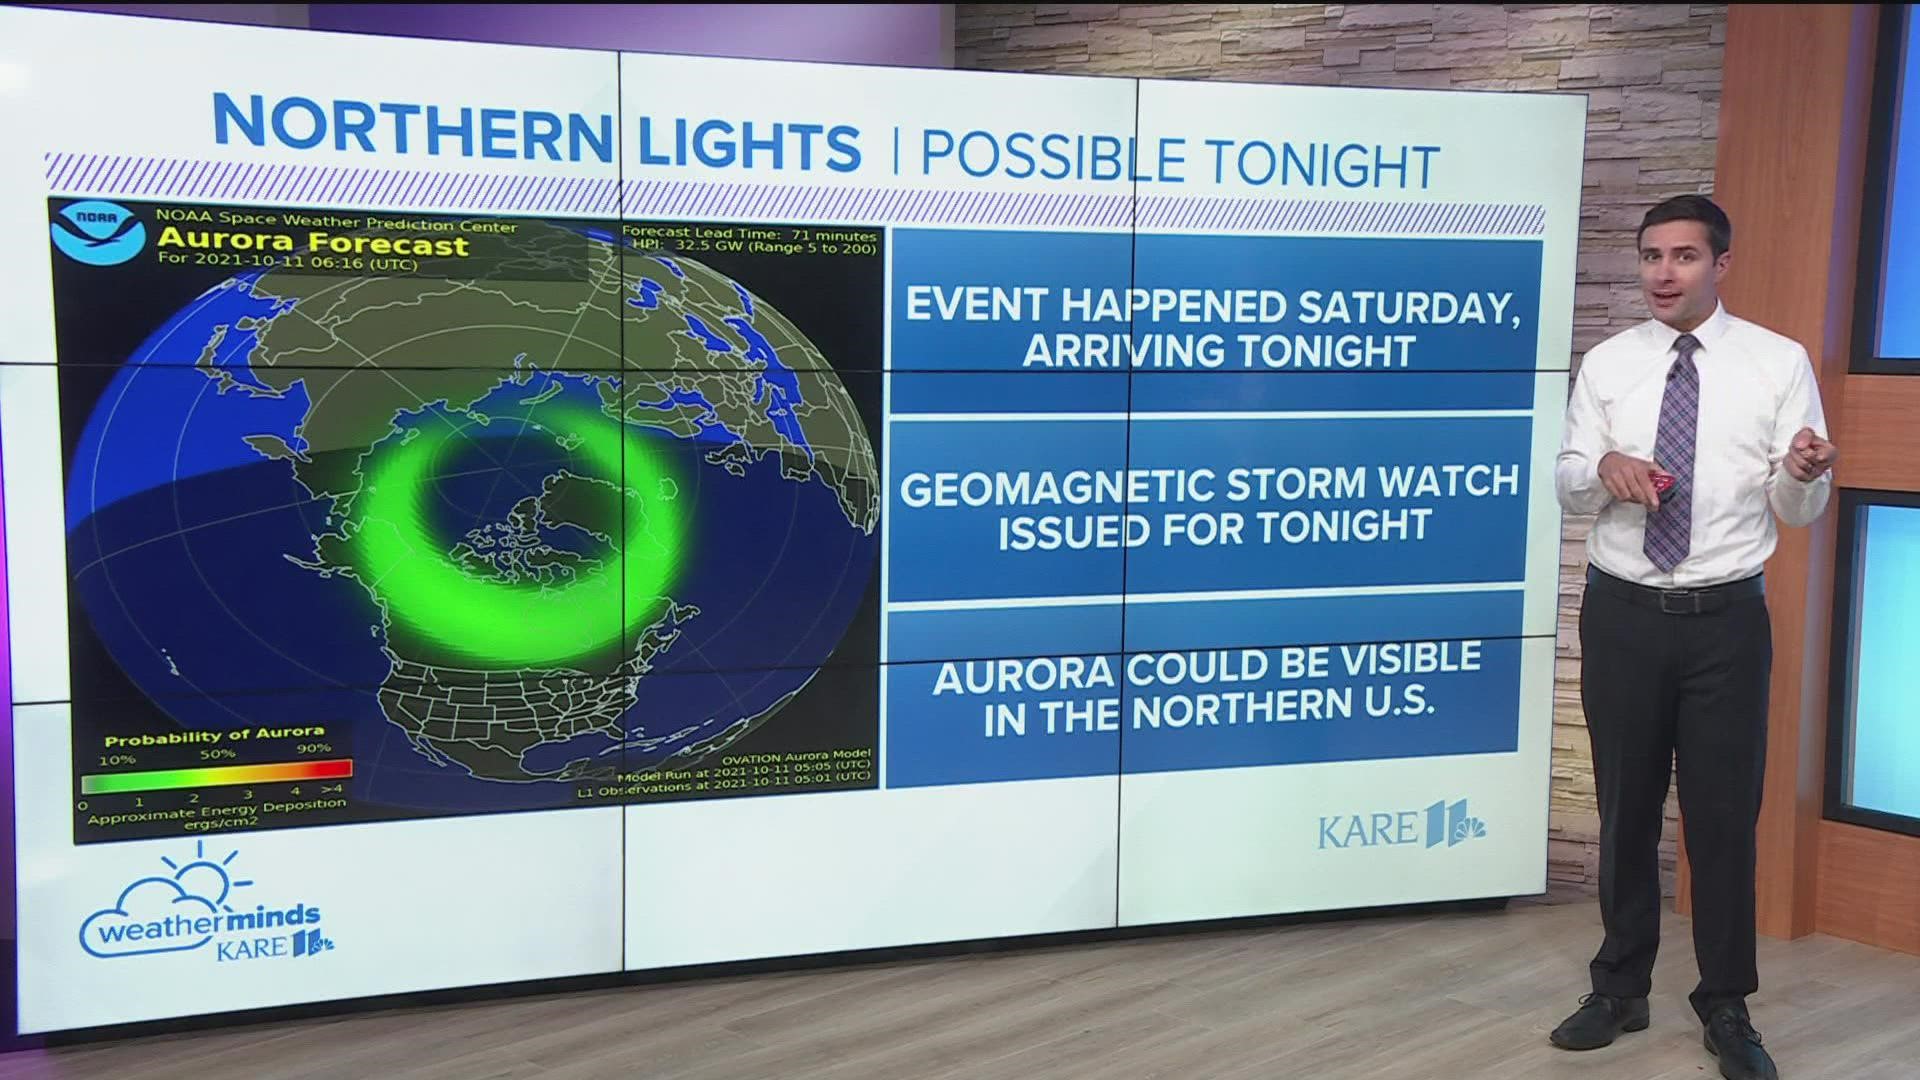 A geomagnetic storm has the potential to bring visible northern lights to the northern United States Monday night. KARE 11's Ben Dery explains.